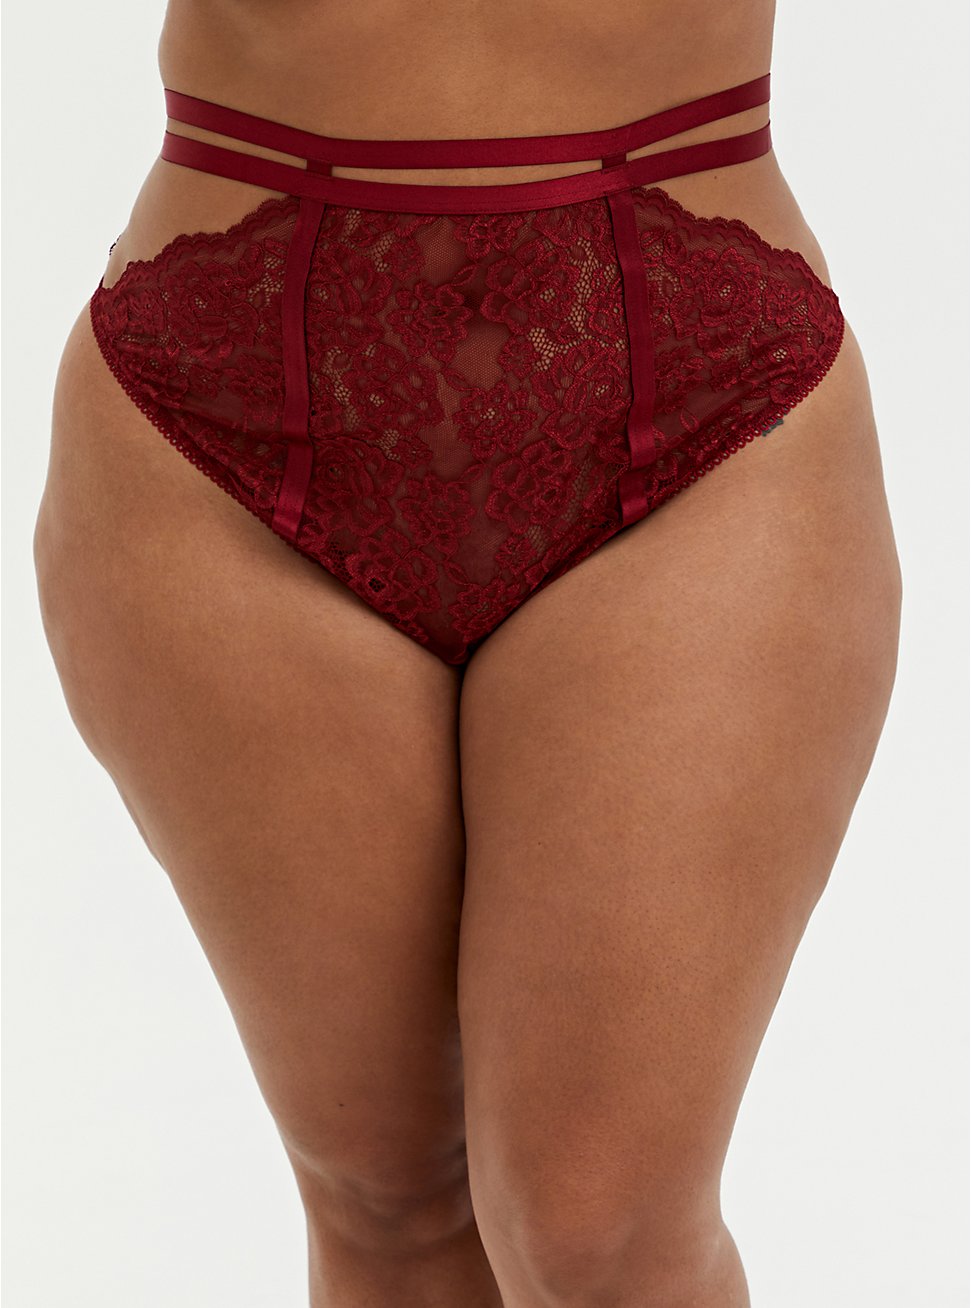 Plus Size Dark Red Lace Cutout Cage High Waist Thong Panty, BIKING RED, hi-res